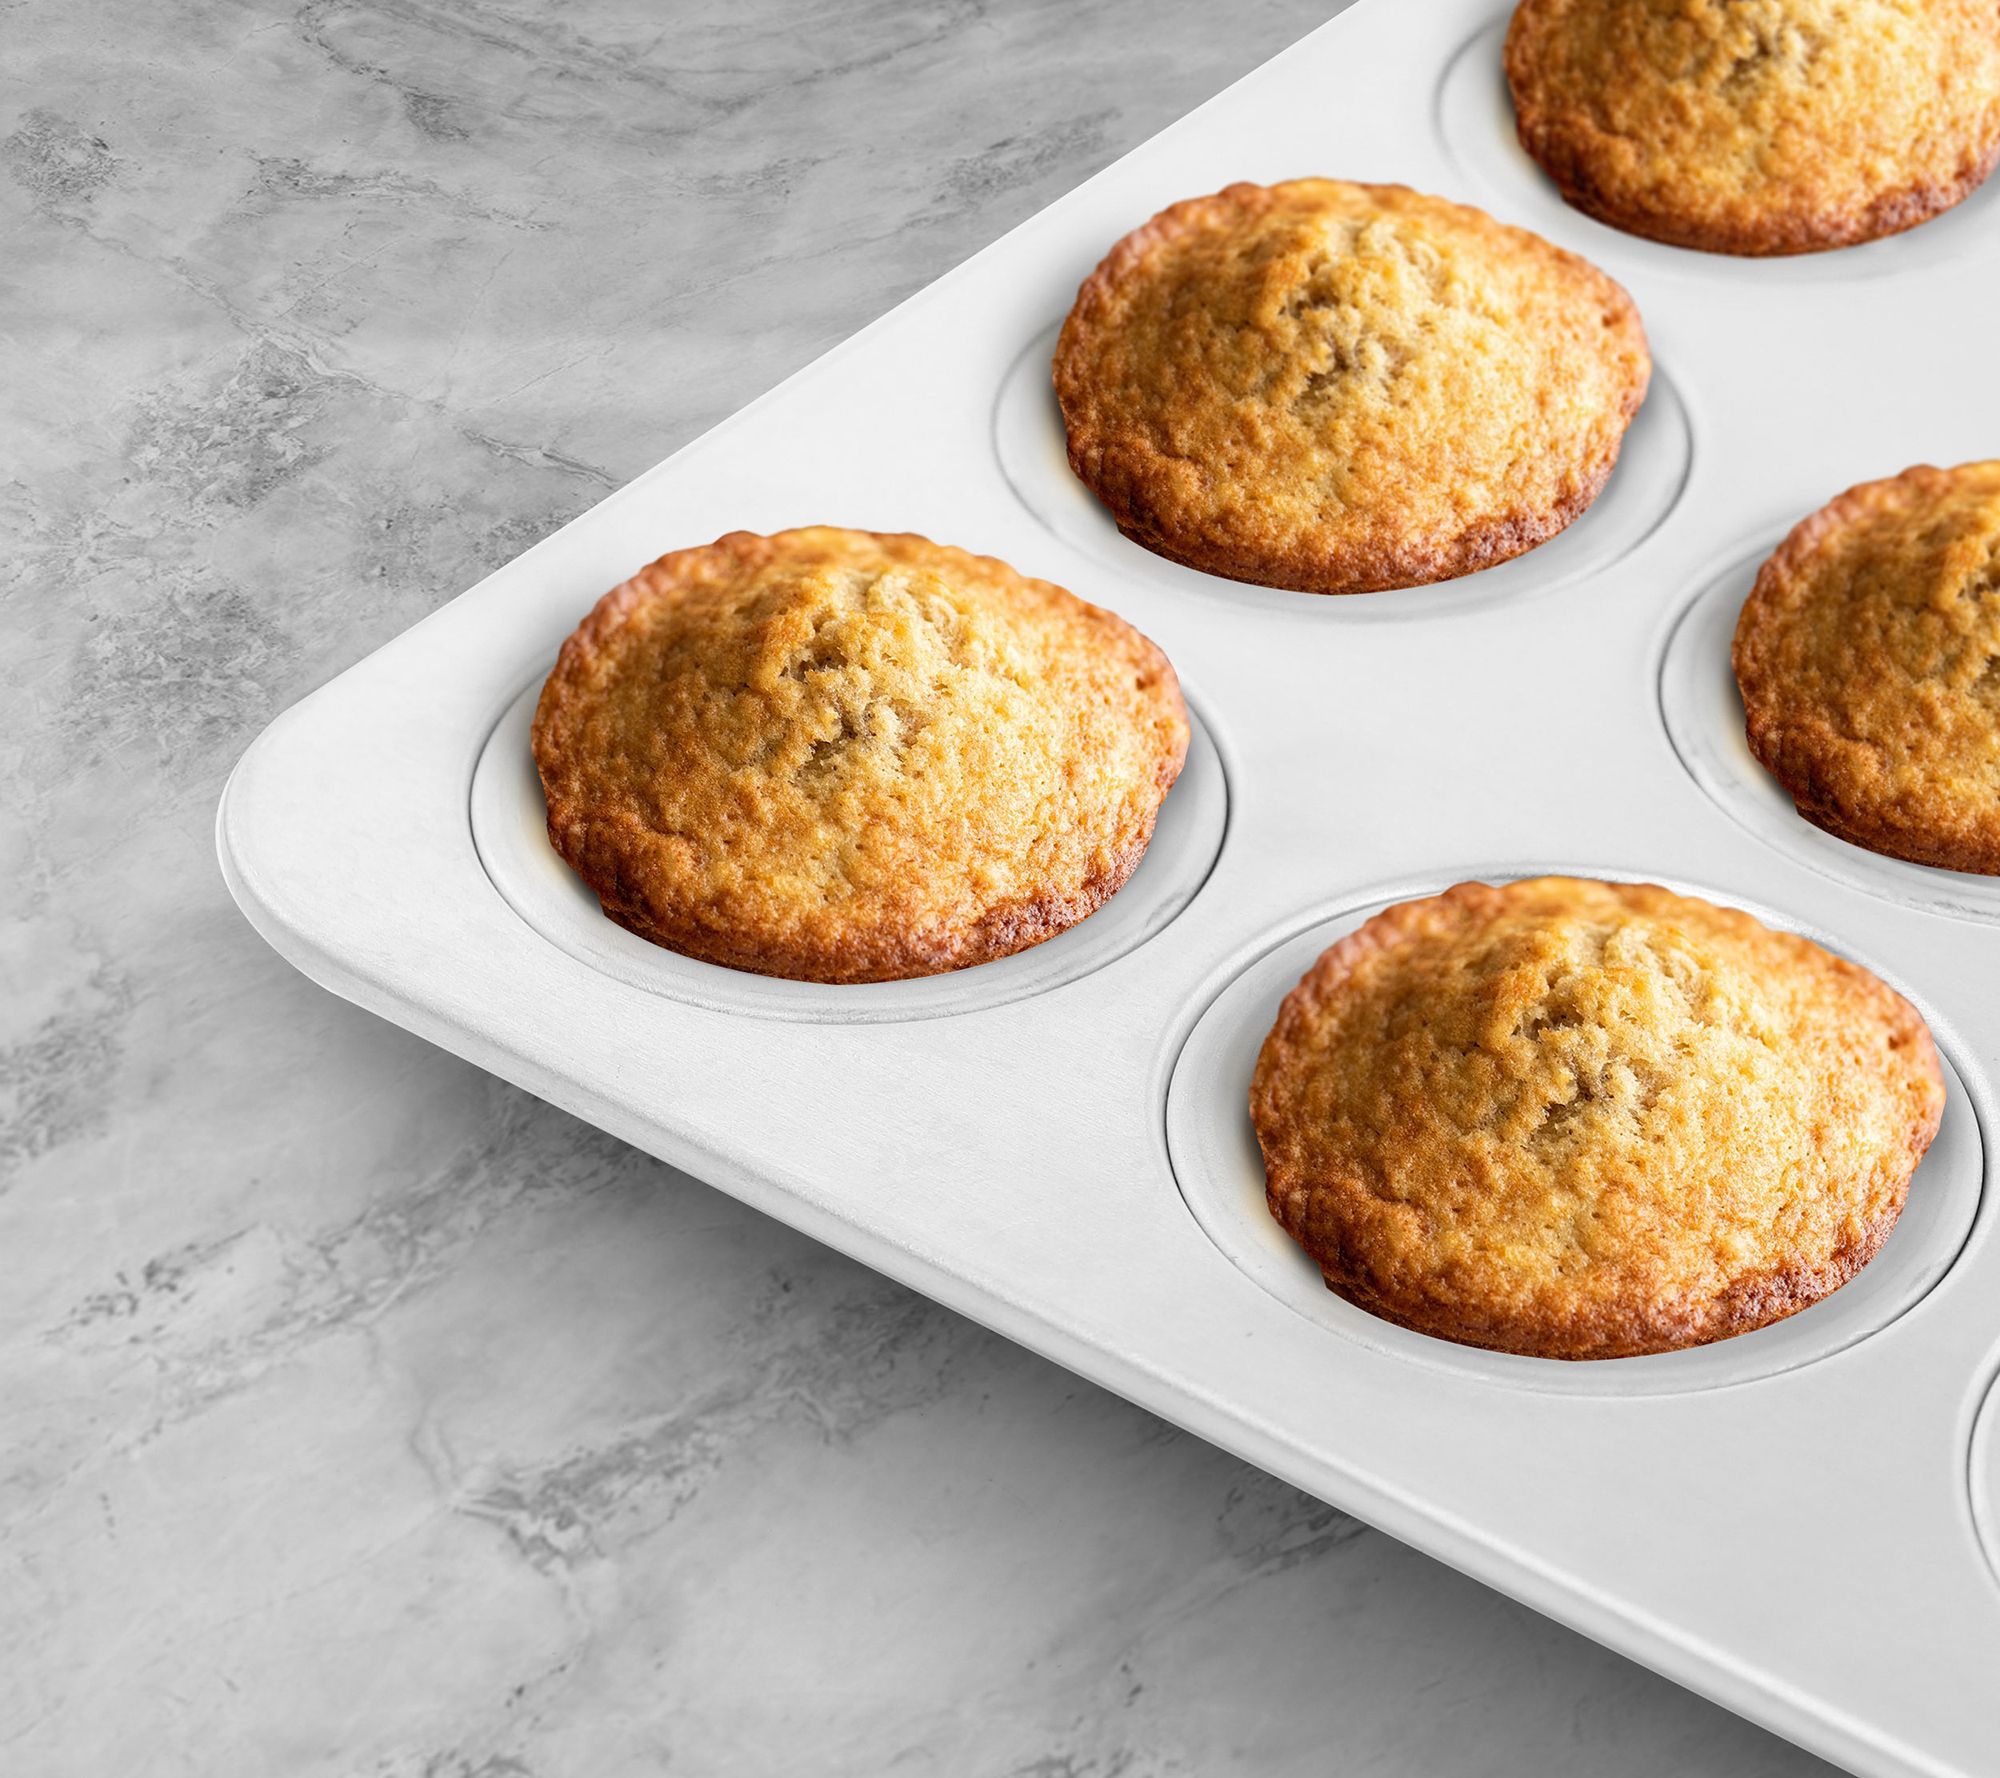 6 Cup Muffin Top Pan